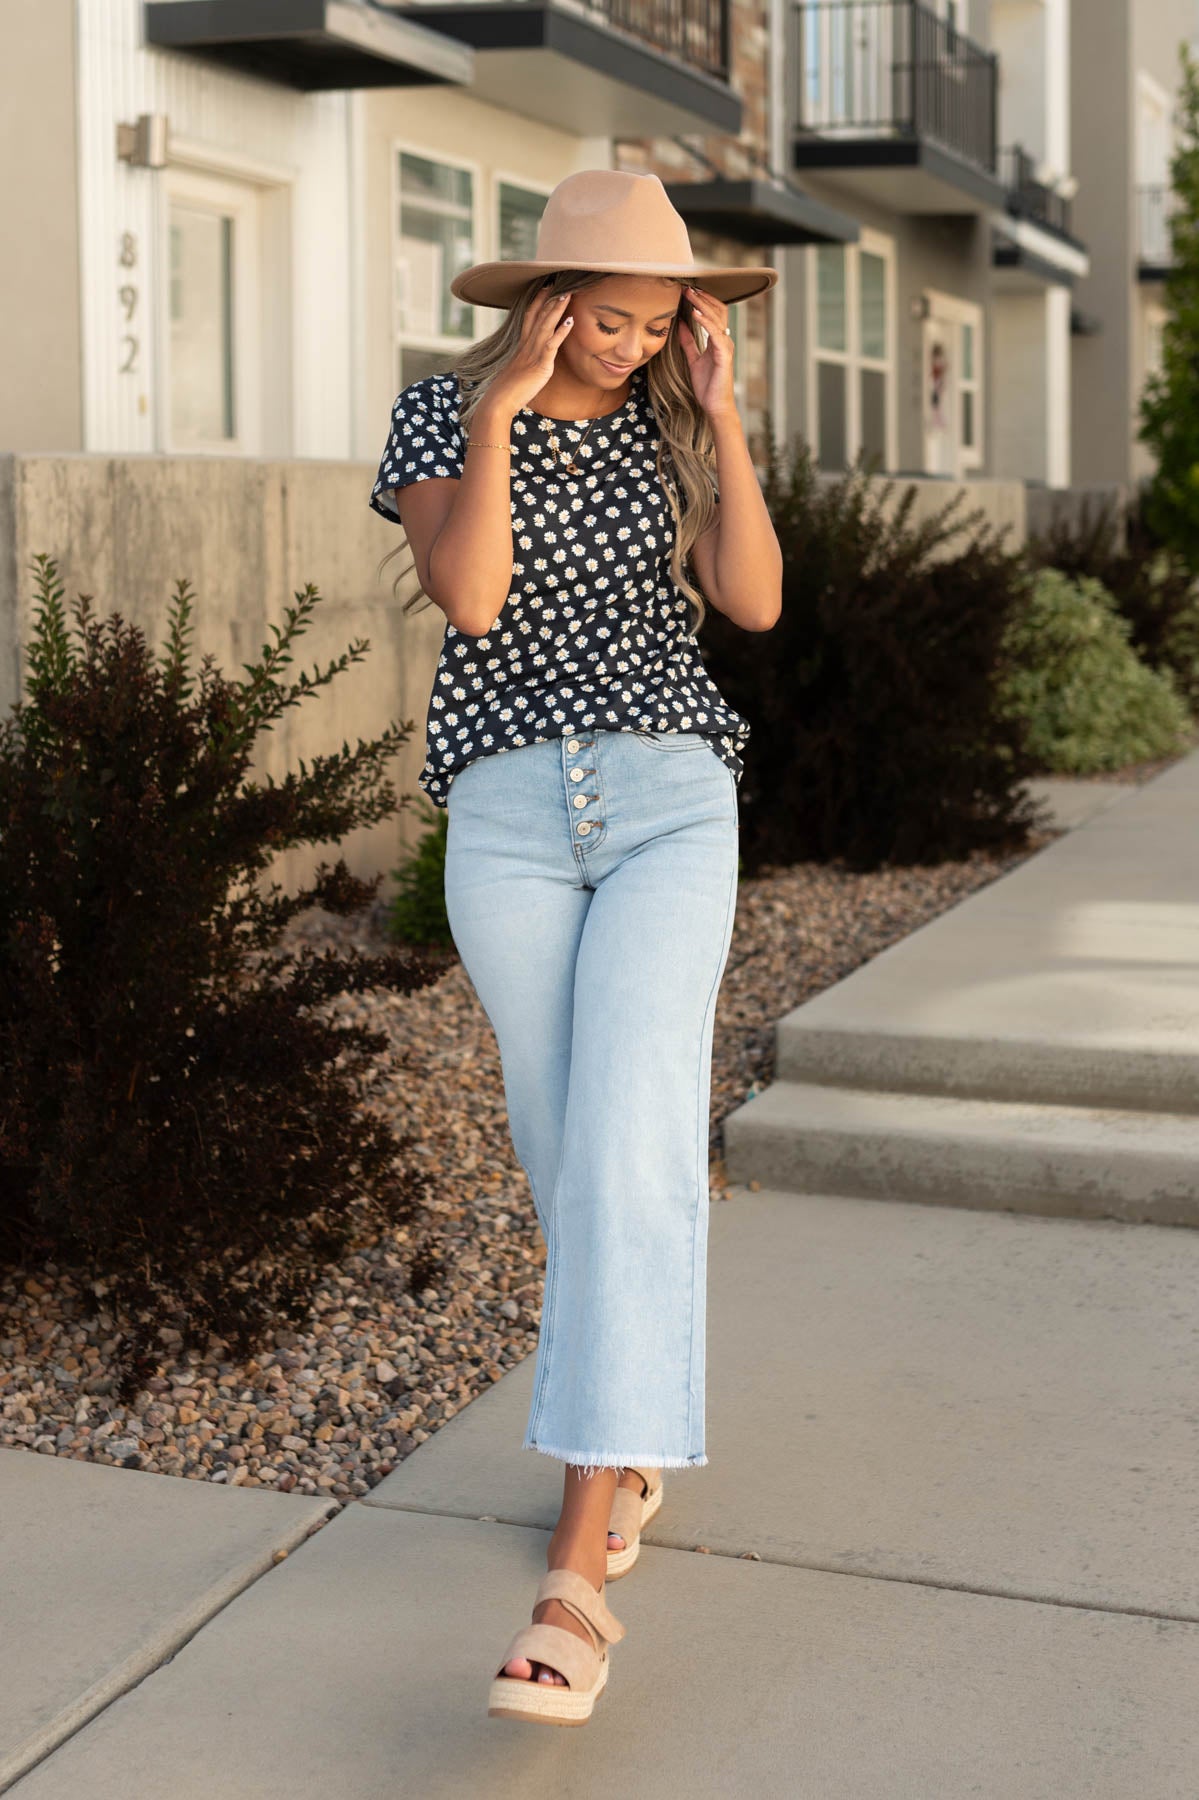 Nico light wide leg jeans that button up